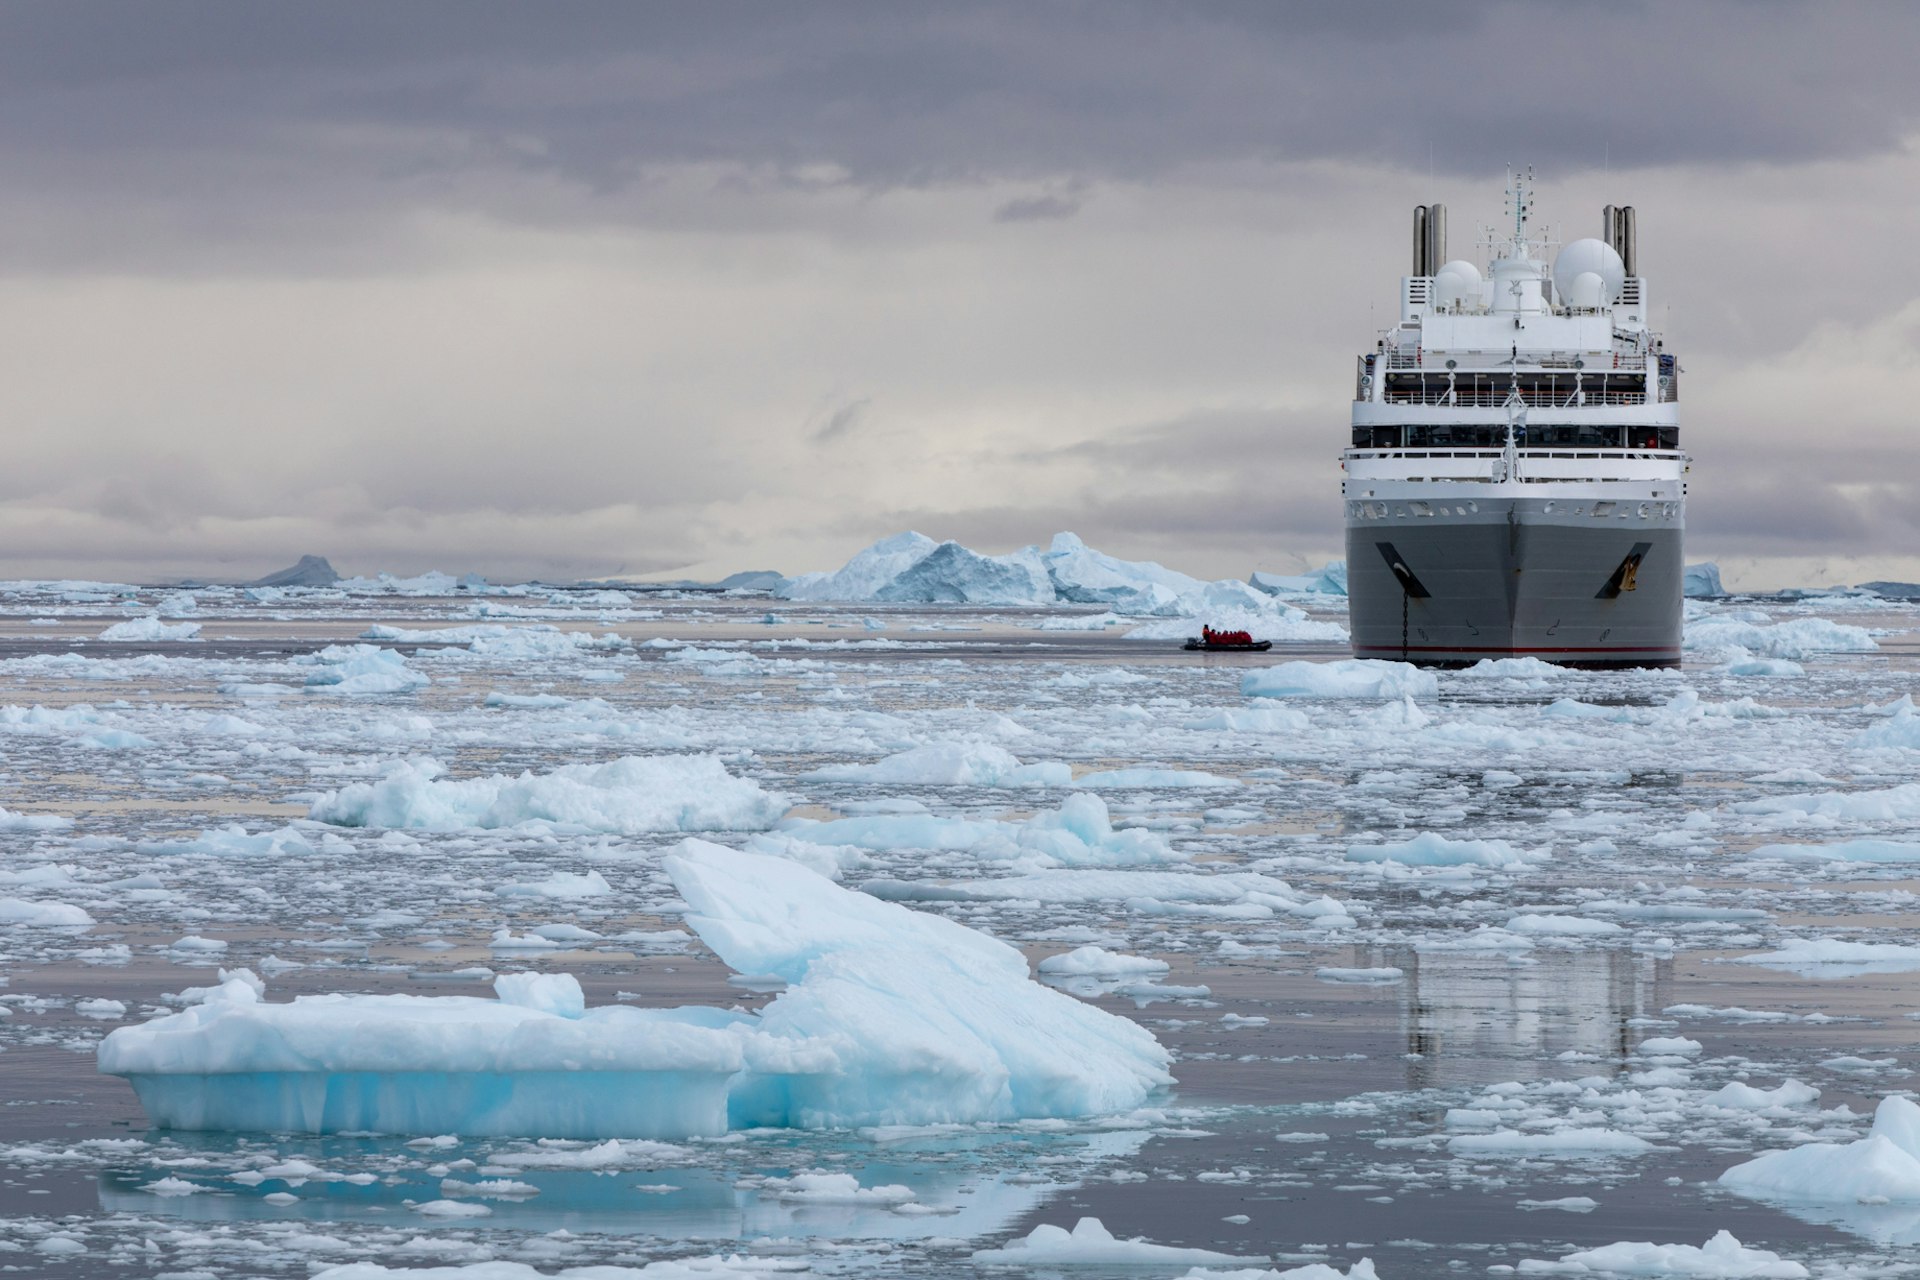 A large ship navigates the icy waters of the Arctic